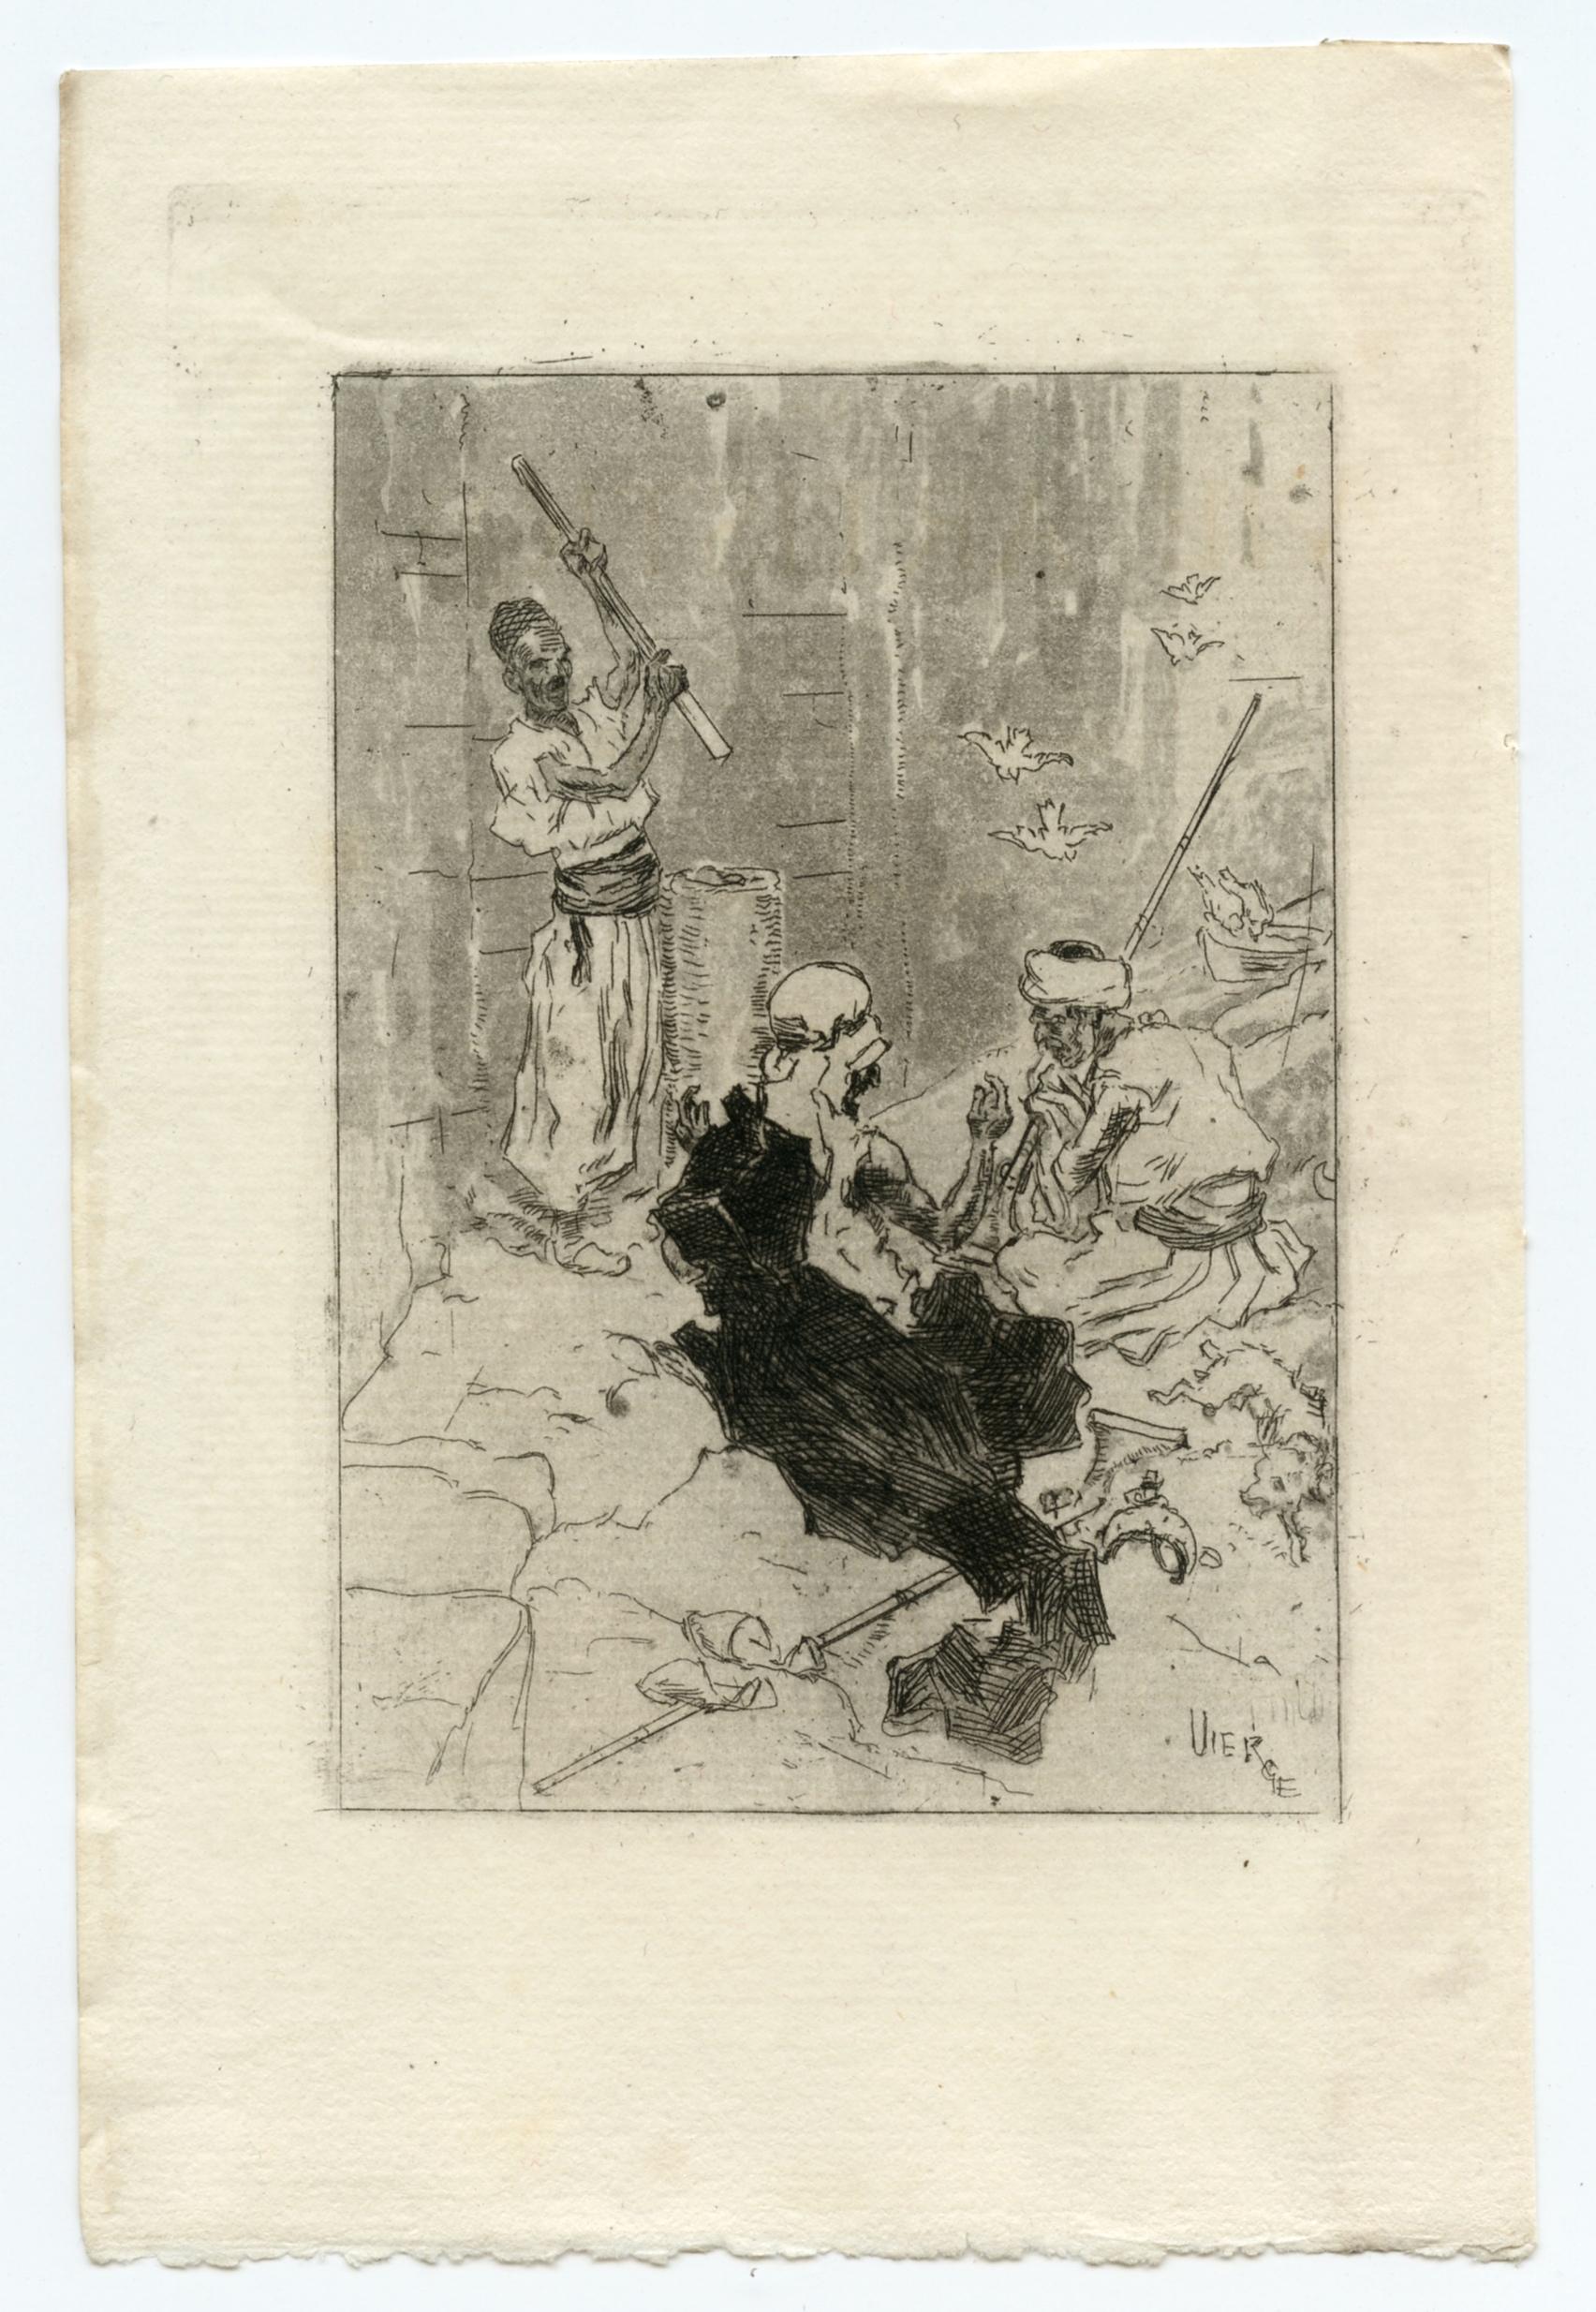 Medium: original etching. This impression on laid paper was printed in 1901 for Gustave Geffroy's 